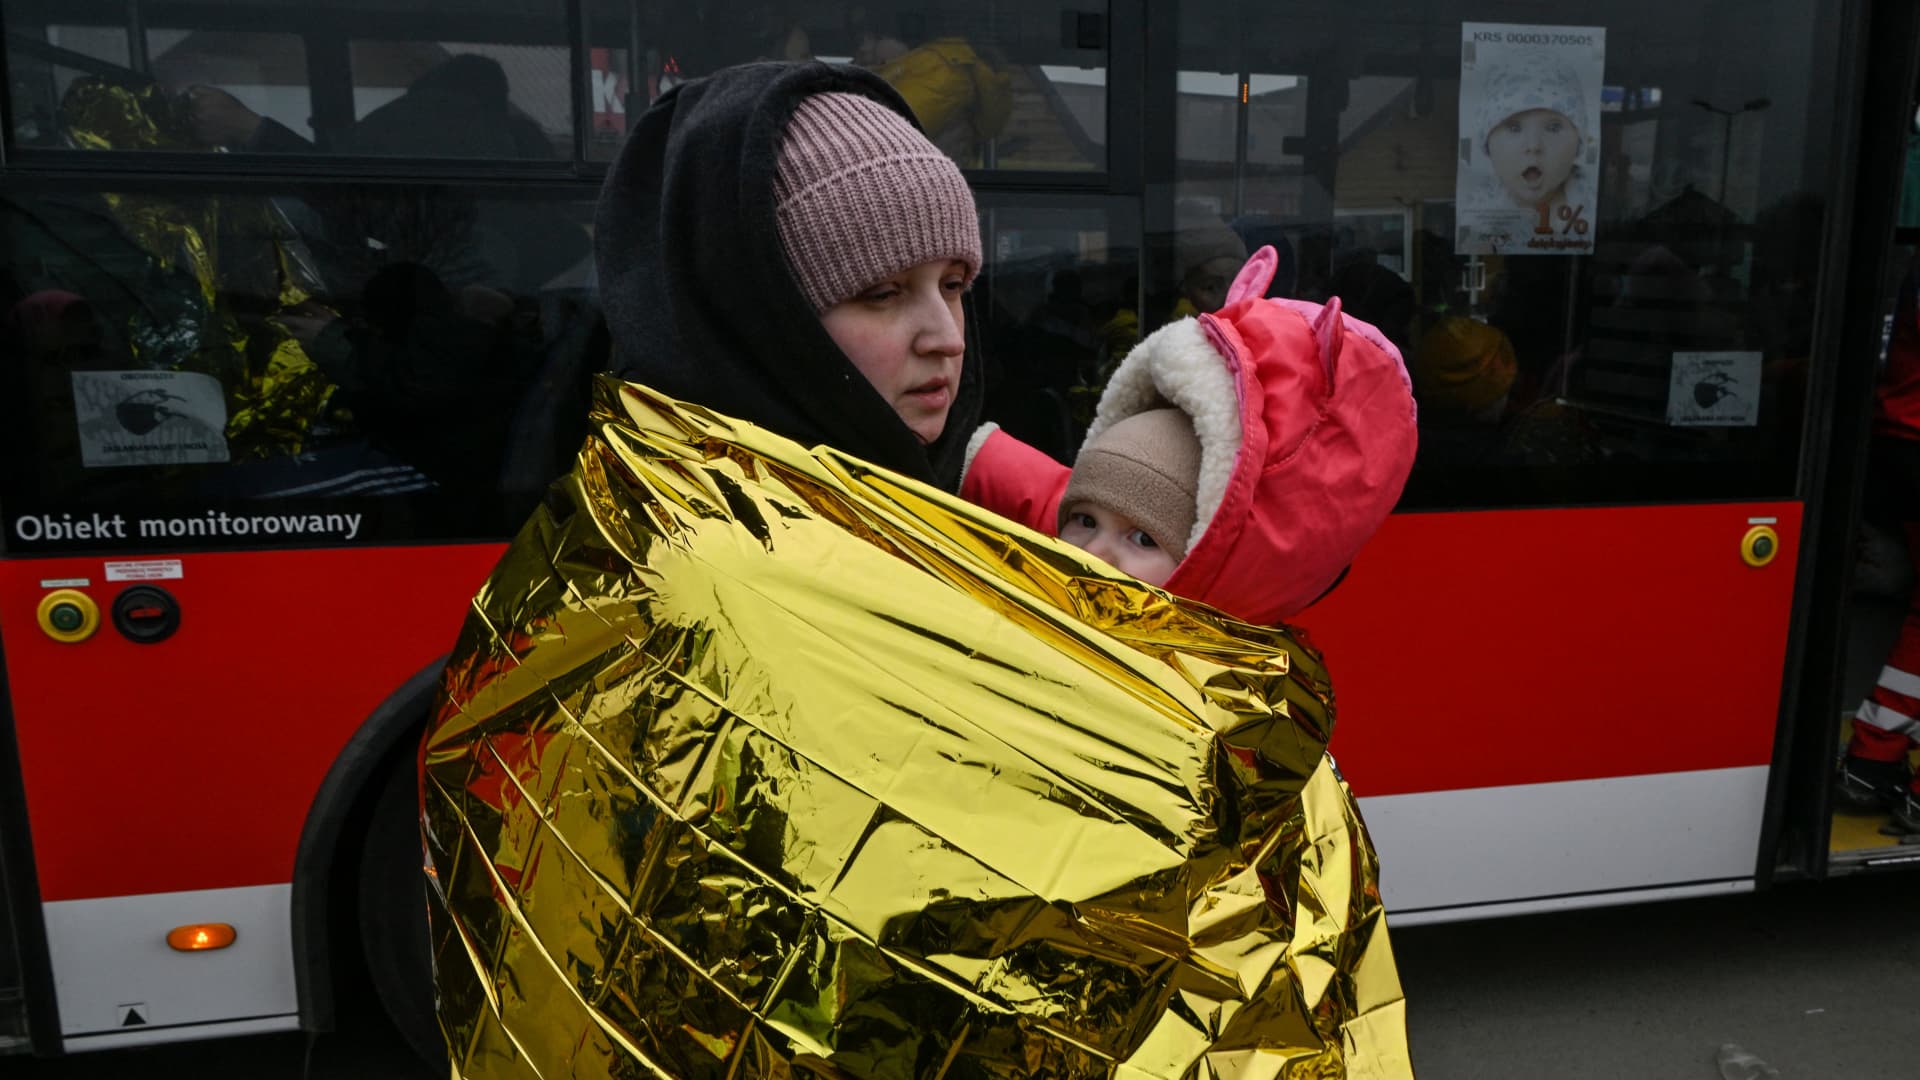 A woman with her child waits in freezing cold temperatures to get on bus, after crossing the Ukrainian border into Poland, at the Medyka border crossing in Poland, on March 7, 2022.